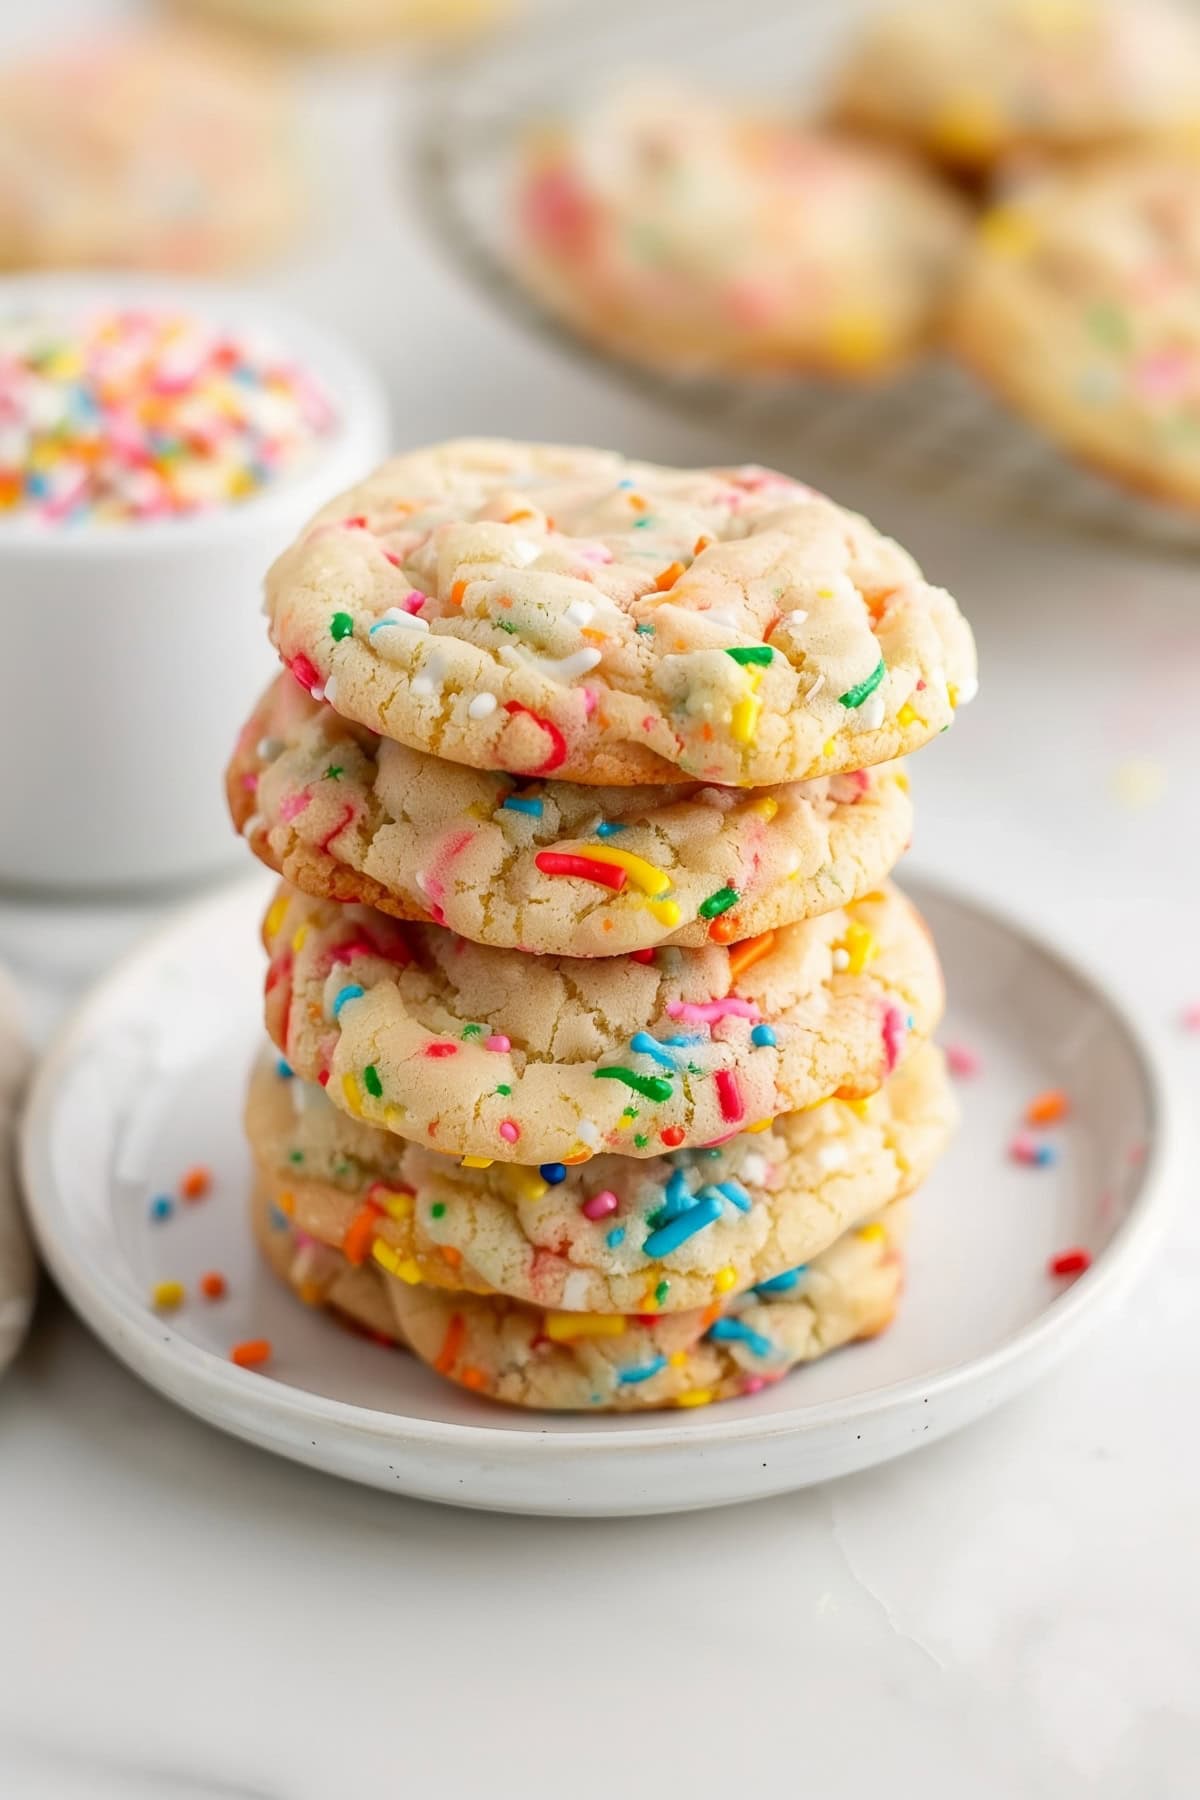 A plate of colorful funfetti cake mix cookies with rainbow sprinkles.